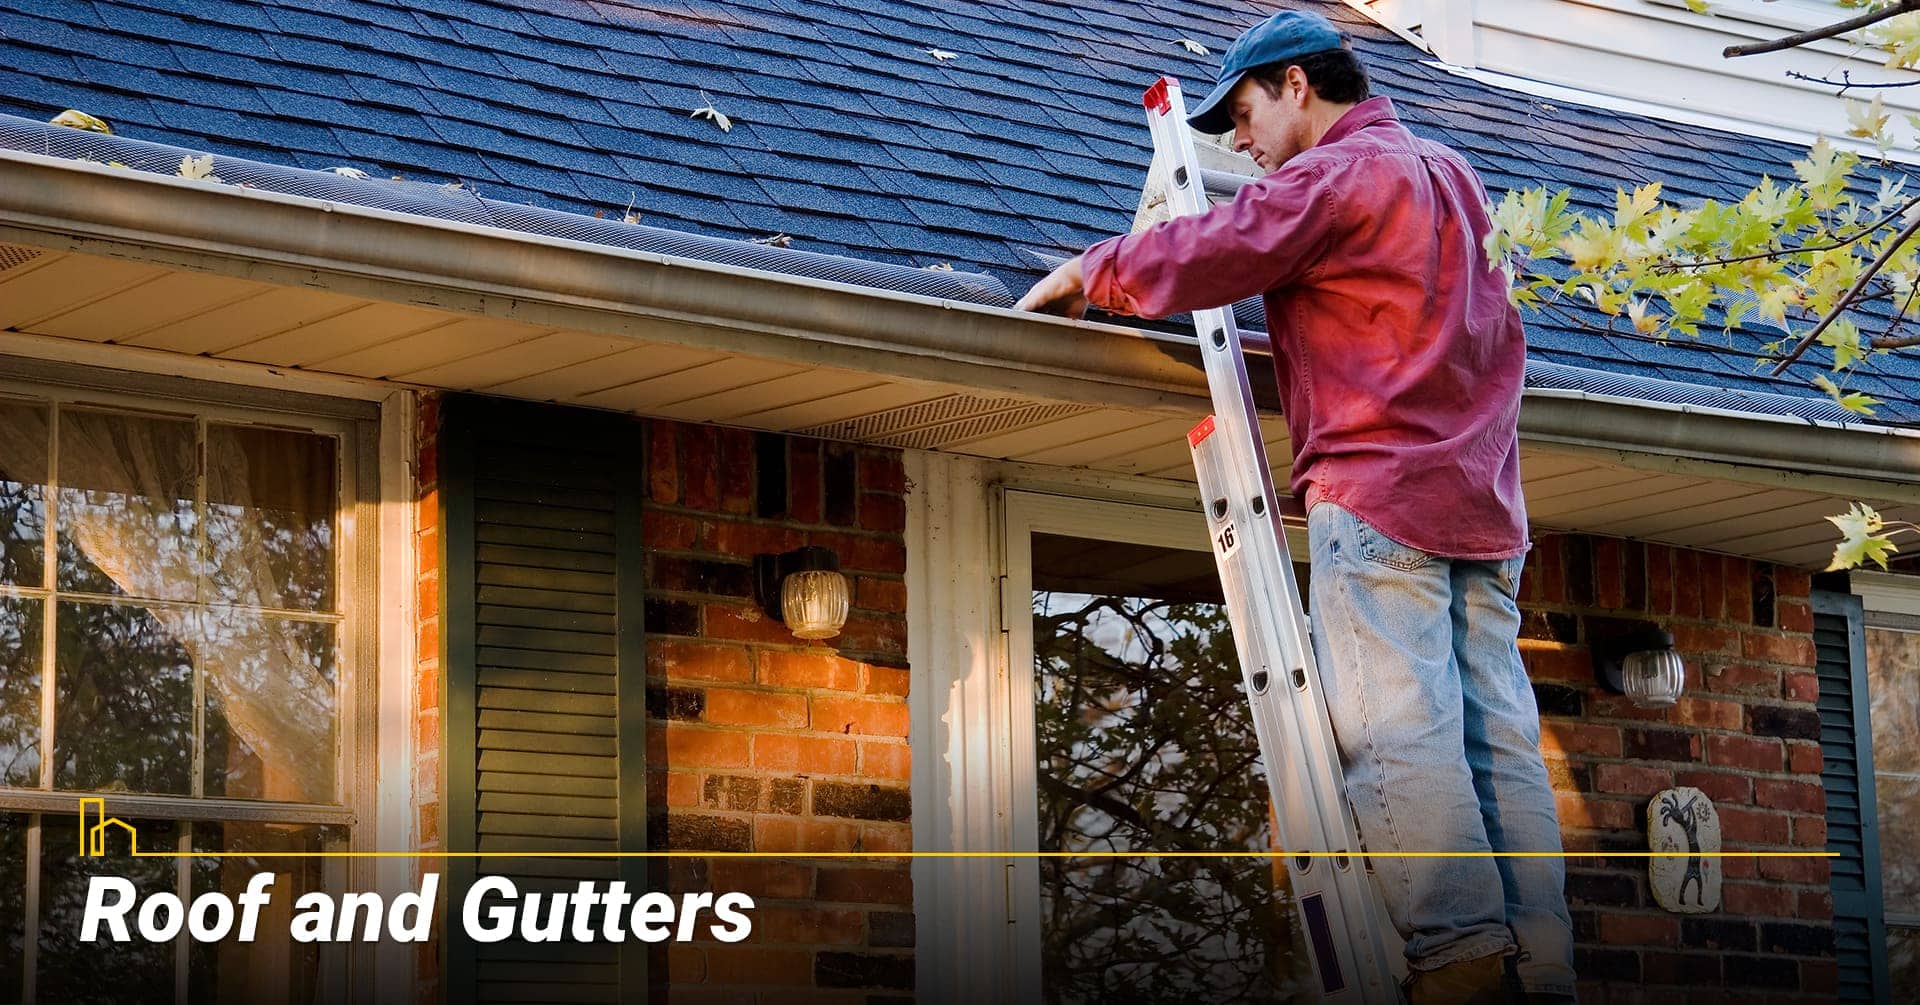 Roof and Gutters, check the conditions of your roof and gutters